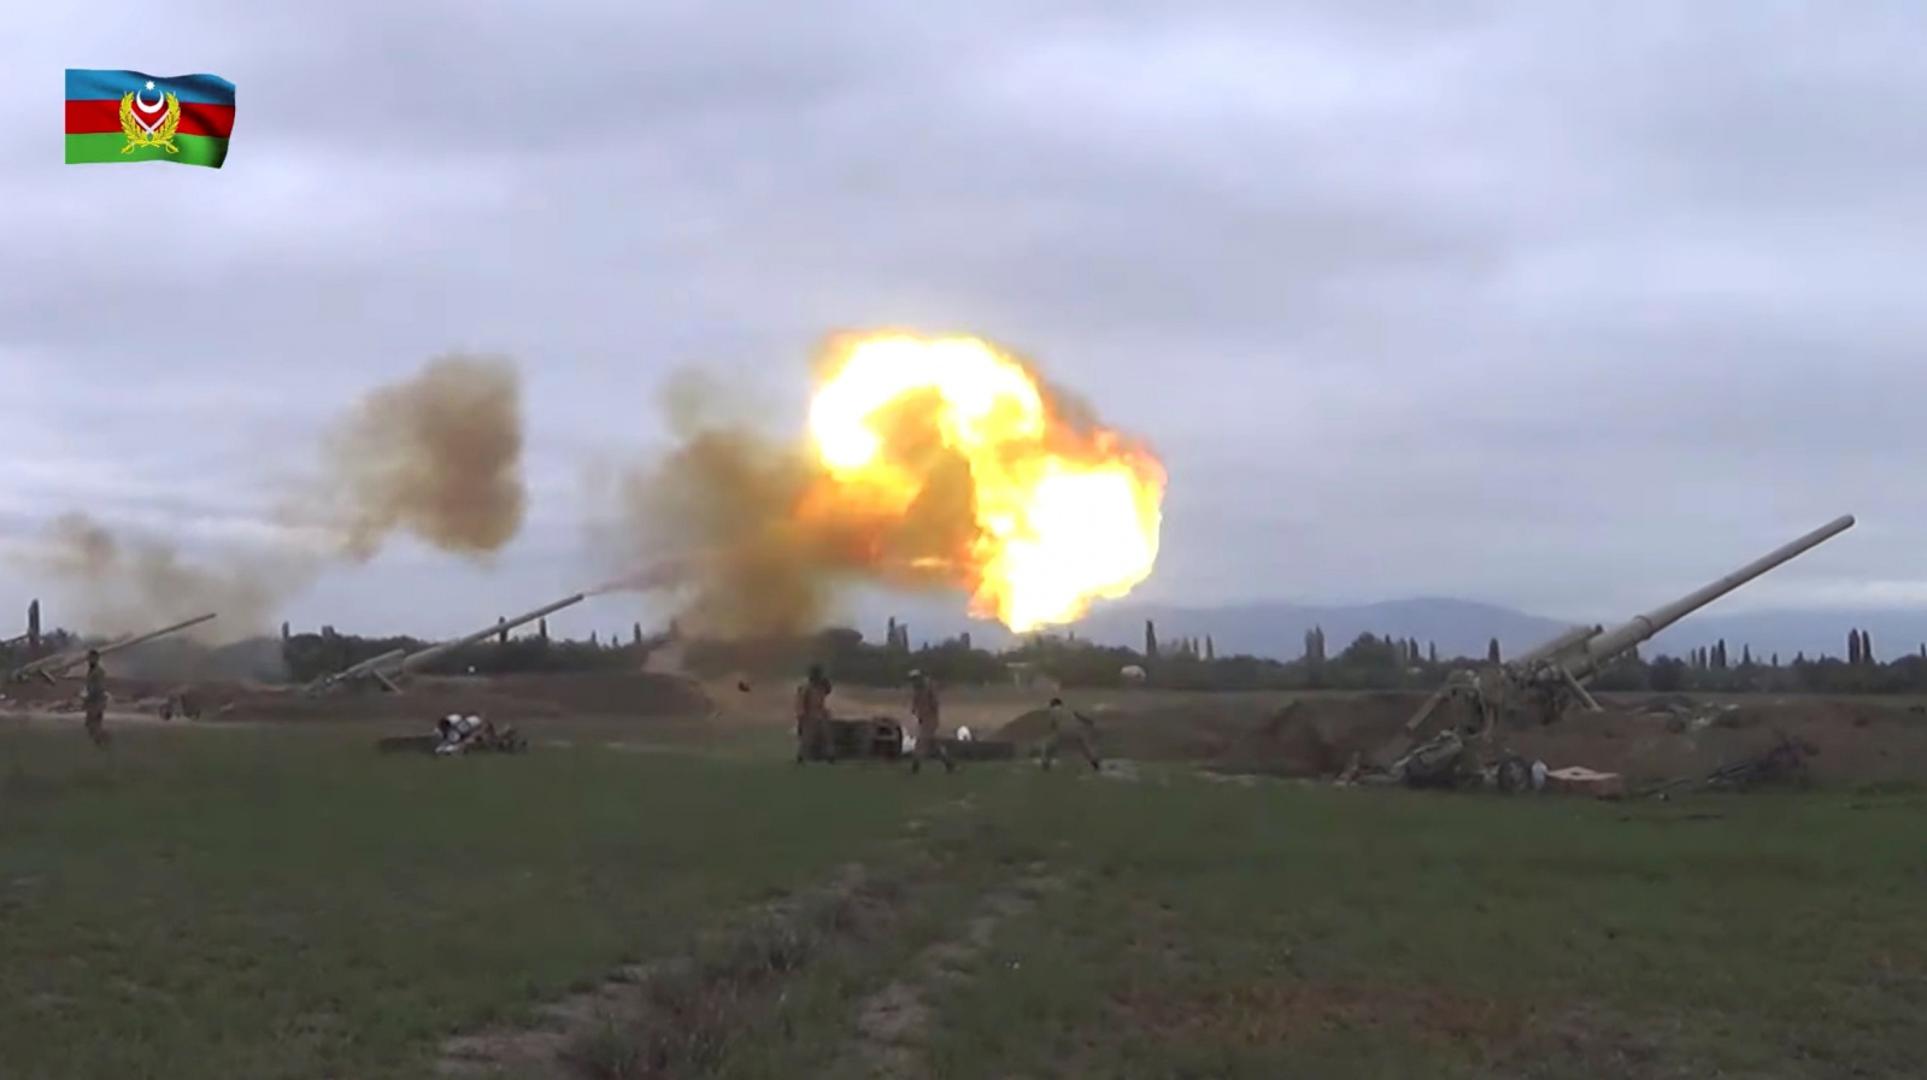 A still image shows members of Azeri armed forces firing artillery in an unidentified location A still image from a video released by the Azerbaijan's Defence Ministry shows members of Azeri armed forces firing artillery during clashes between Armenia and Azerbaijan over the territory of Nagorno-Karabakh in an unidentified location, in this still image from footage released September 28, 2020. Defence Ministry of Azerbaijan/Handout via REUTERS  ATTENTION EDITORS - THIS IMAGE HAS BEEN SUPPLIED BY A THIRD PARTY. NO RESALES. NO ARCHIVES. MANDATORY CREDIT. DEFENCE MINISTRY OF AZERBAIJAN